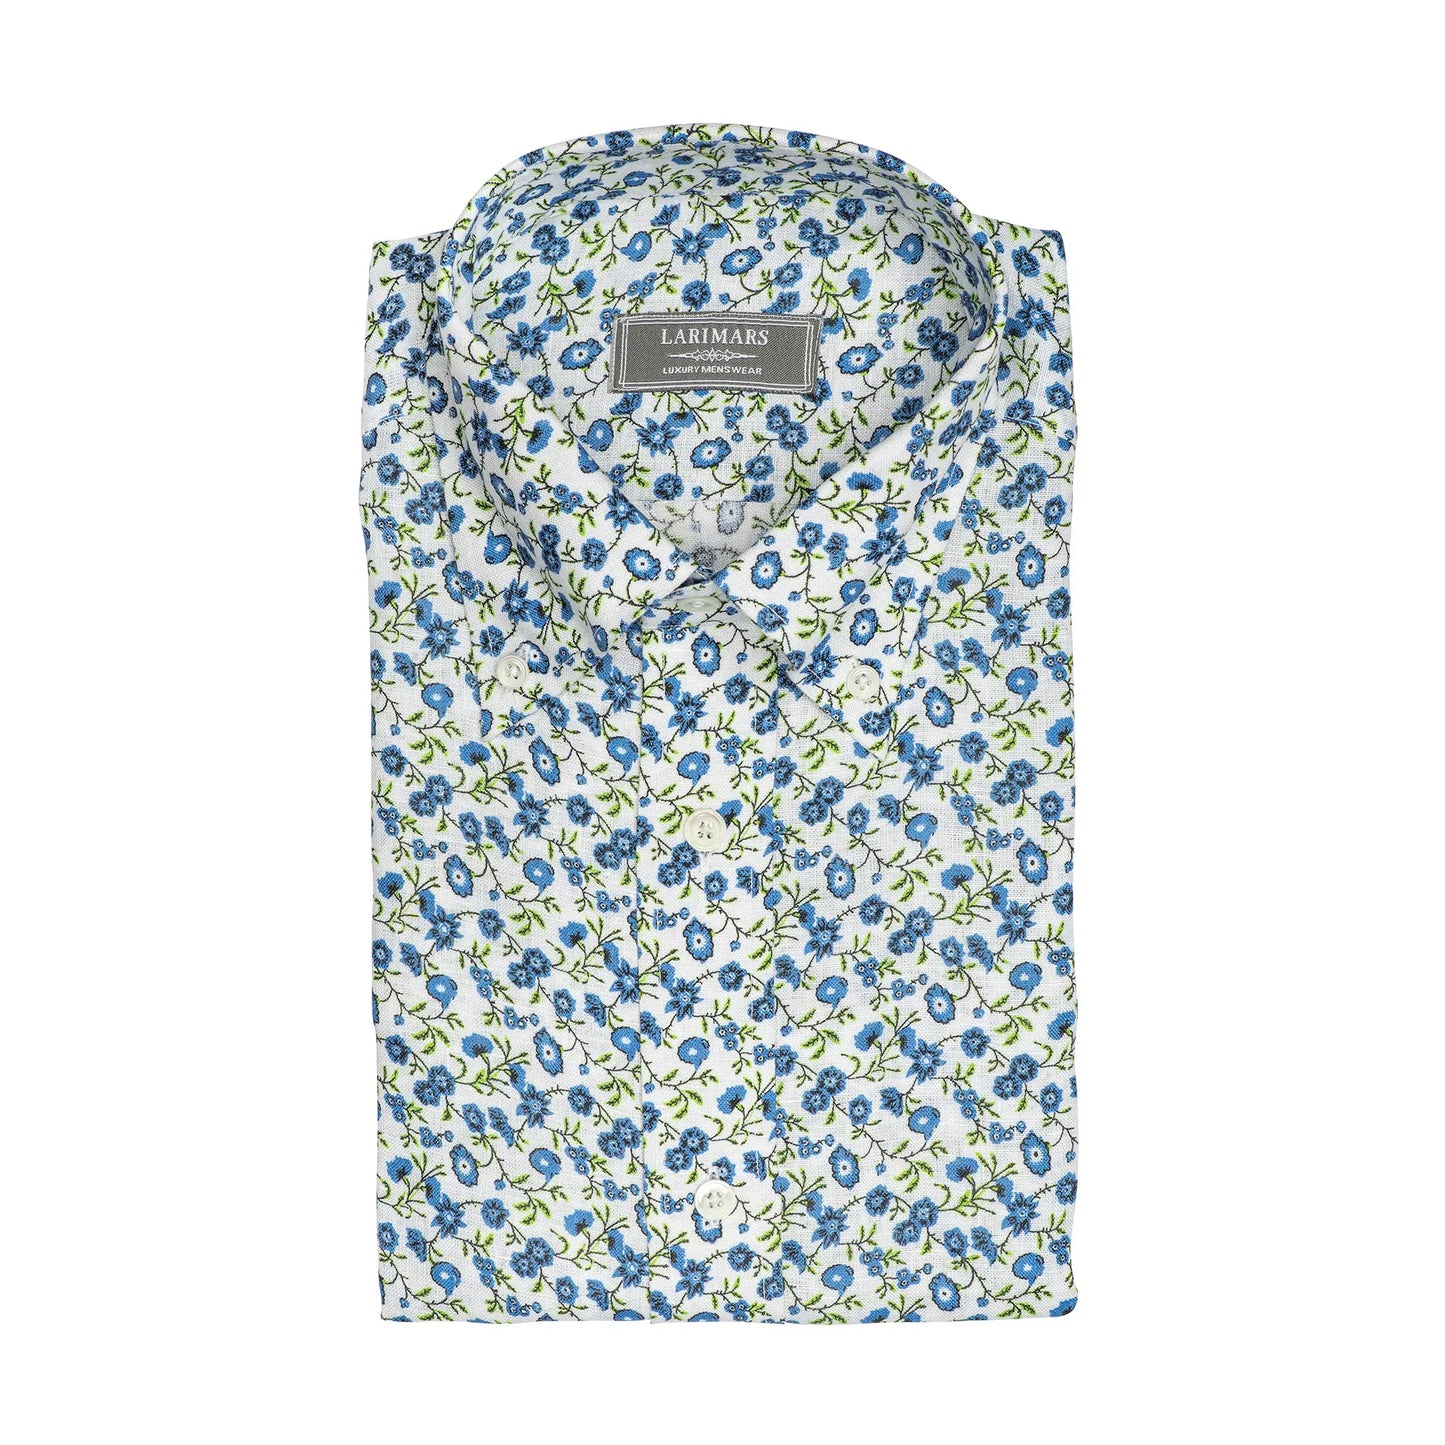 Linen Blue Floral Print - Larimars Clothing Men's Formal and casual wear shirts